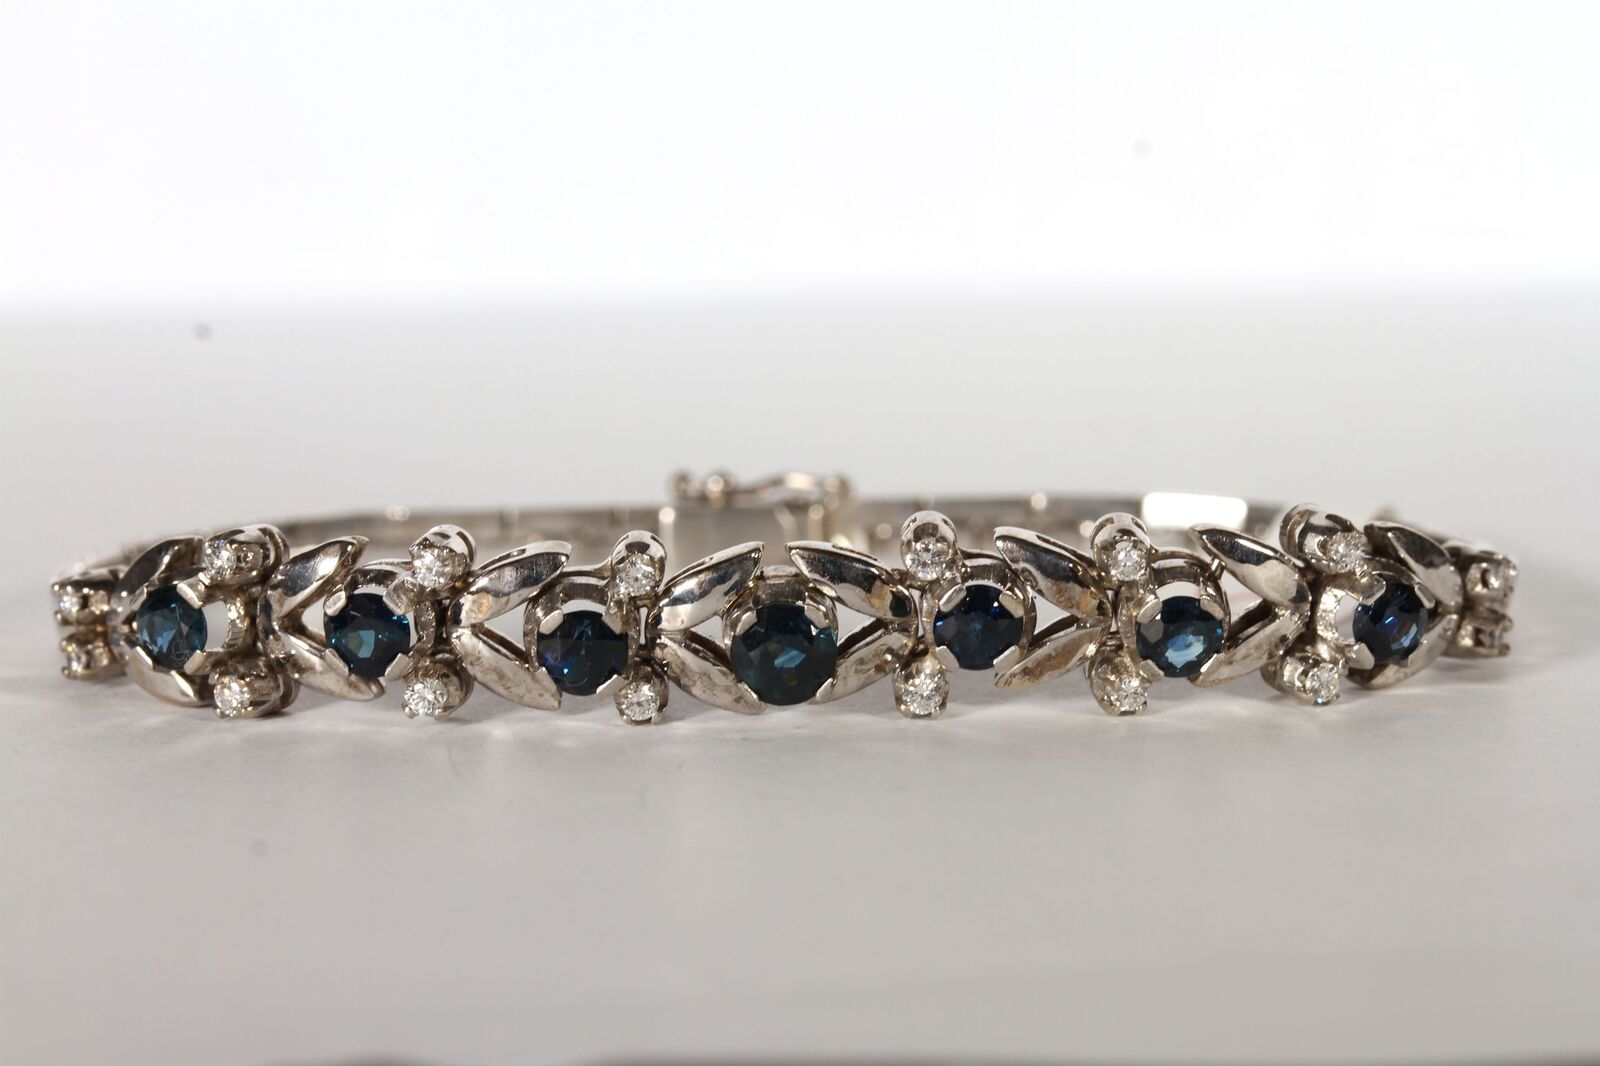 Vintage Sapphire and Diamond Bracelet, set with 7 sapphires estimated total 2.00ct, set with 16